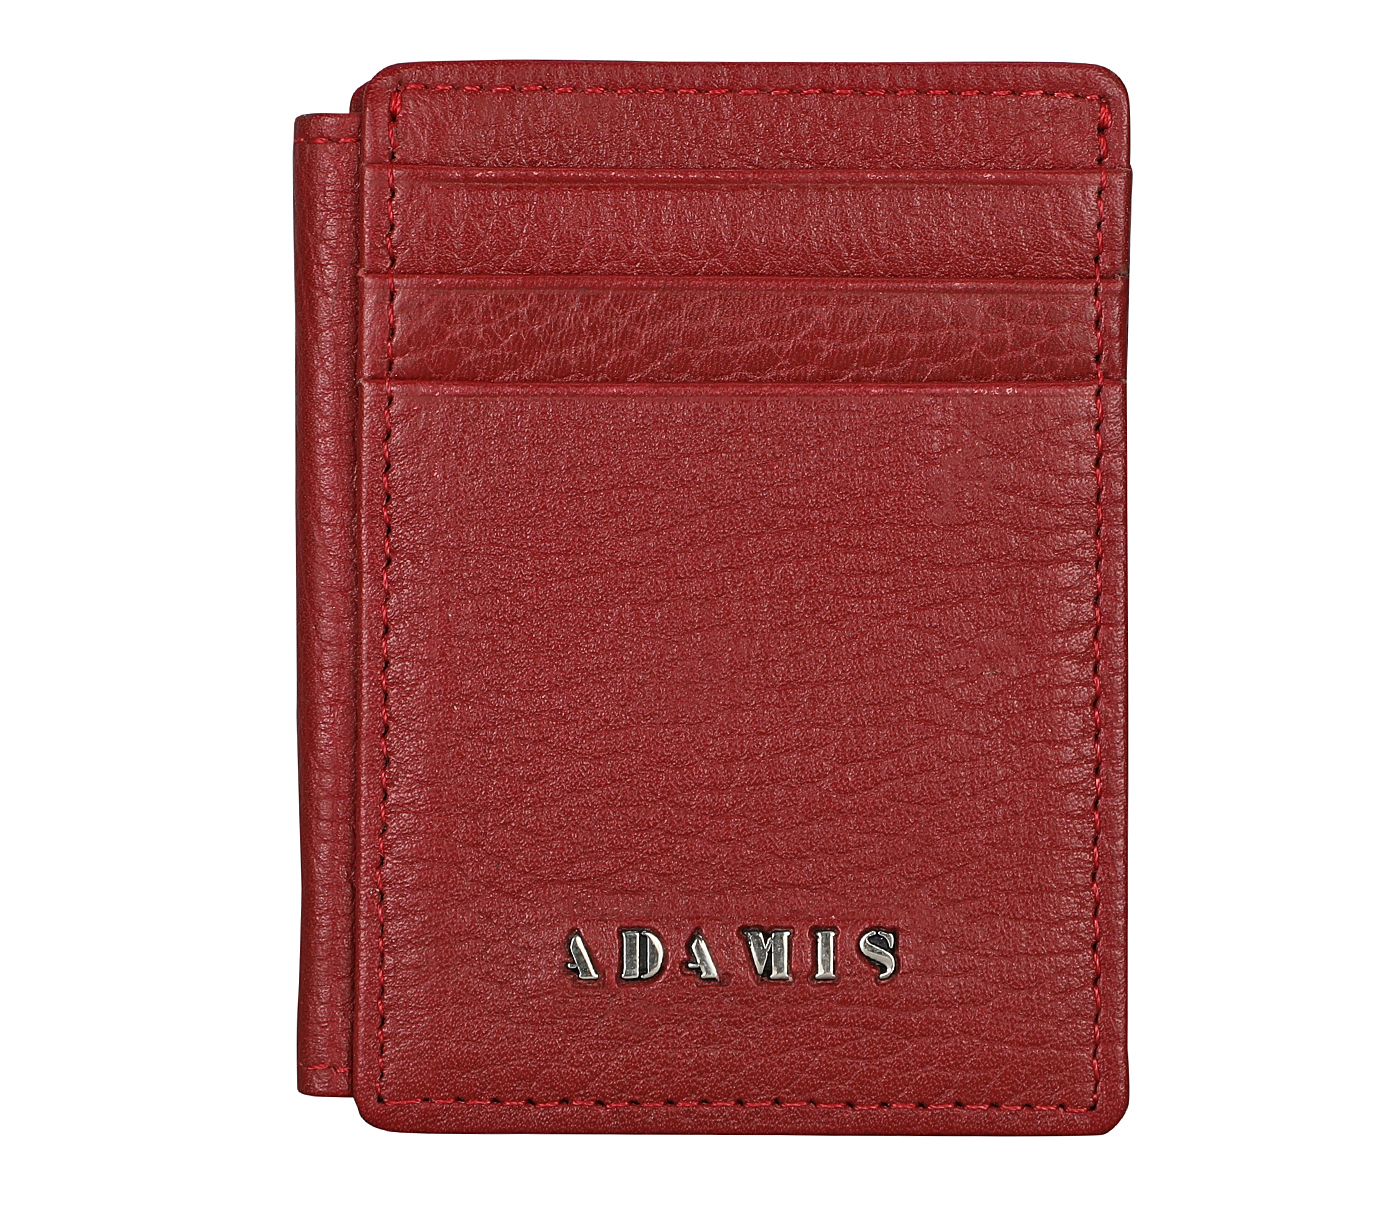 W339--Credit card case and magnetic money clip in genuine leather - Red